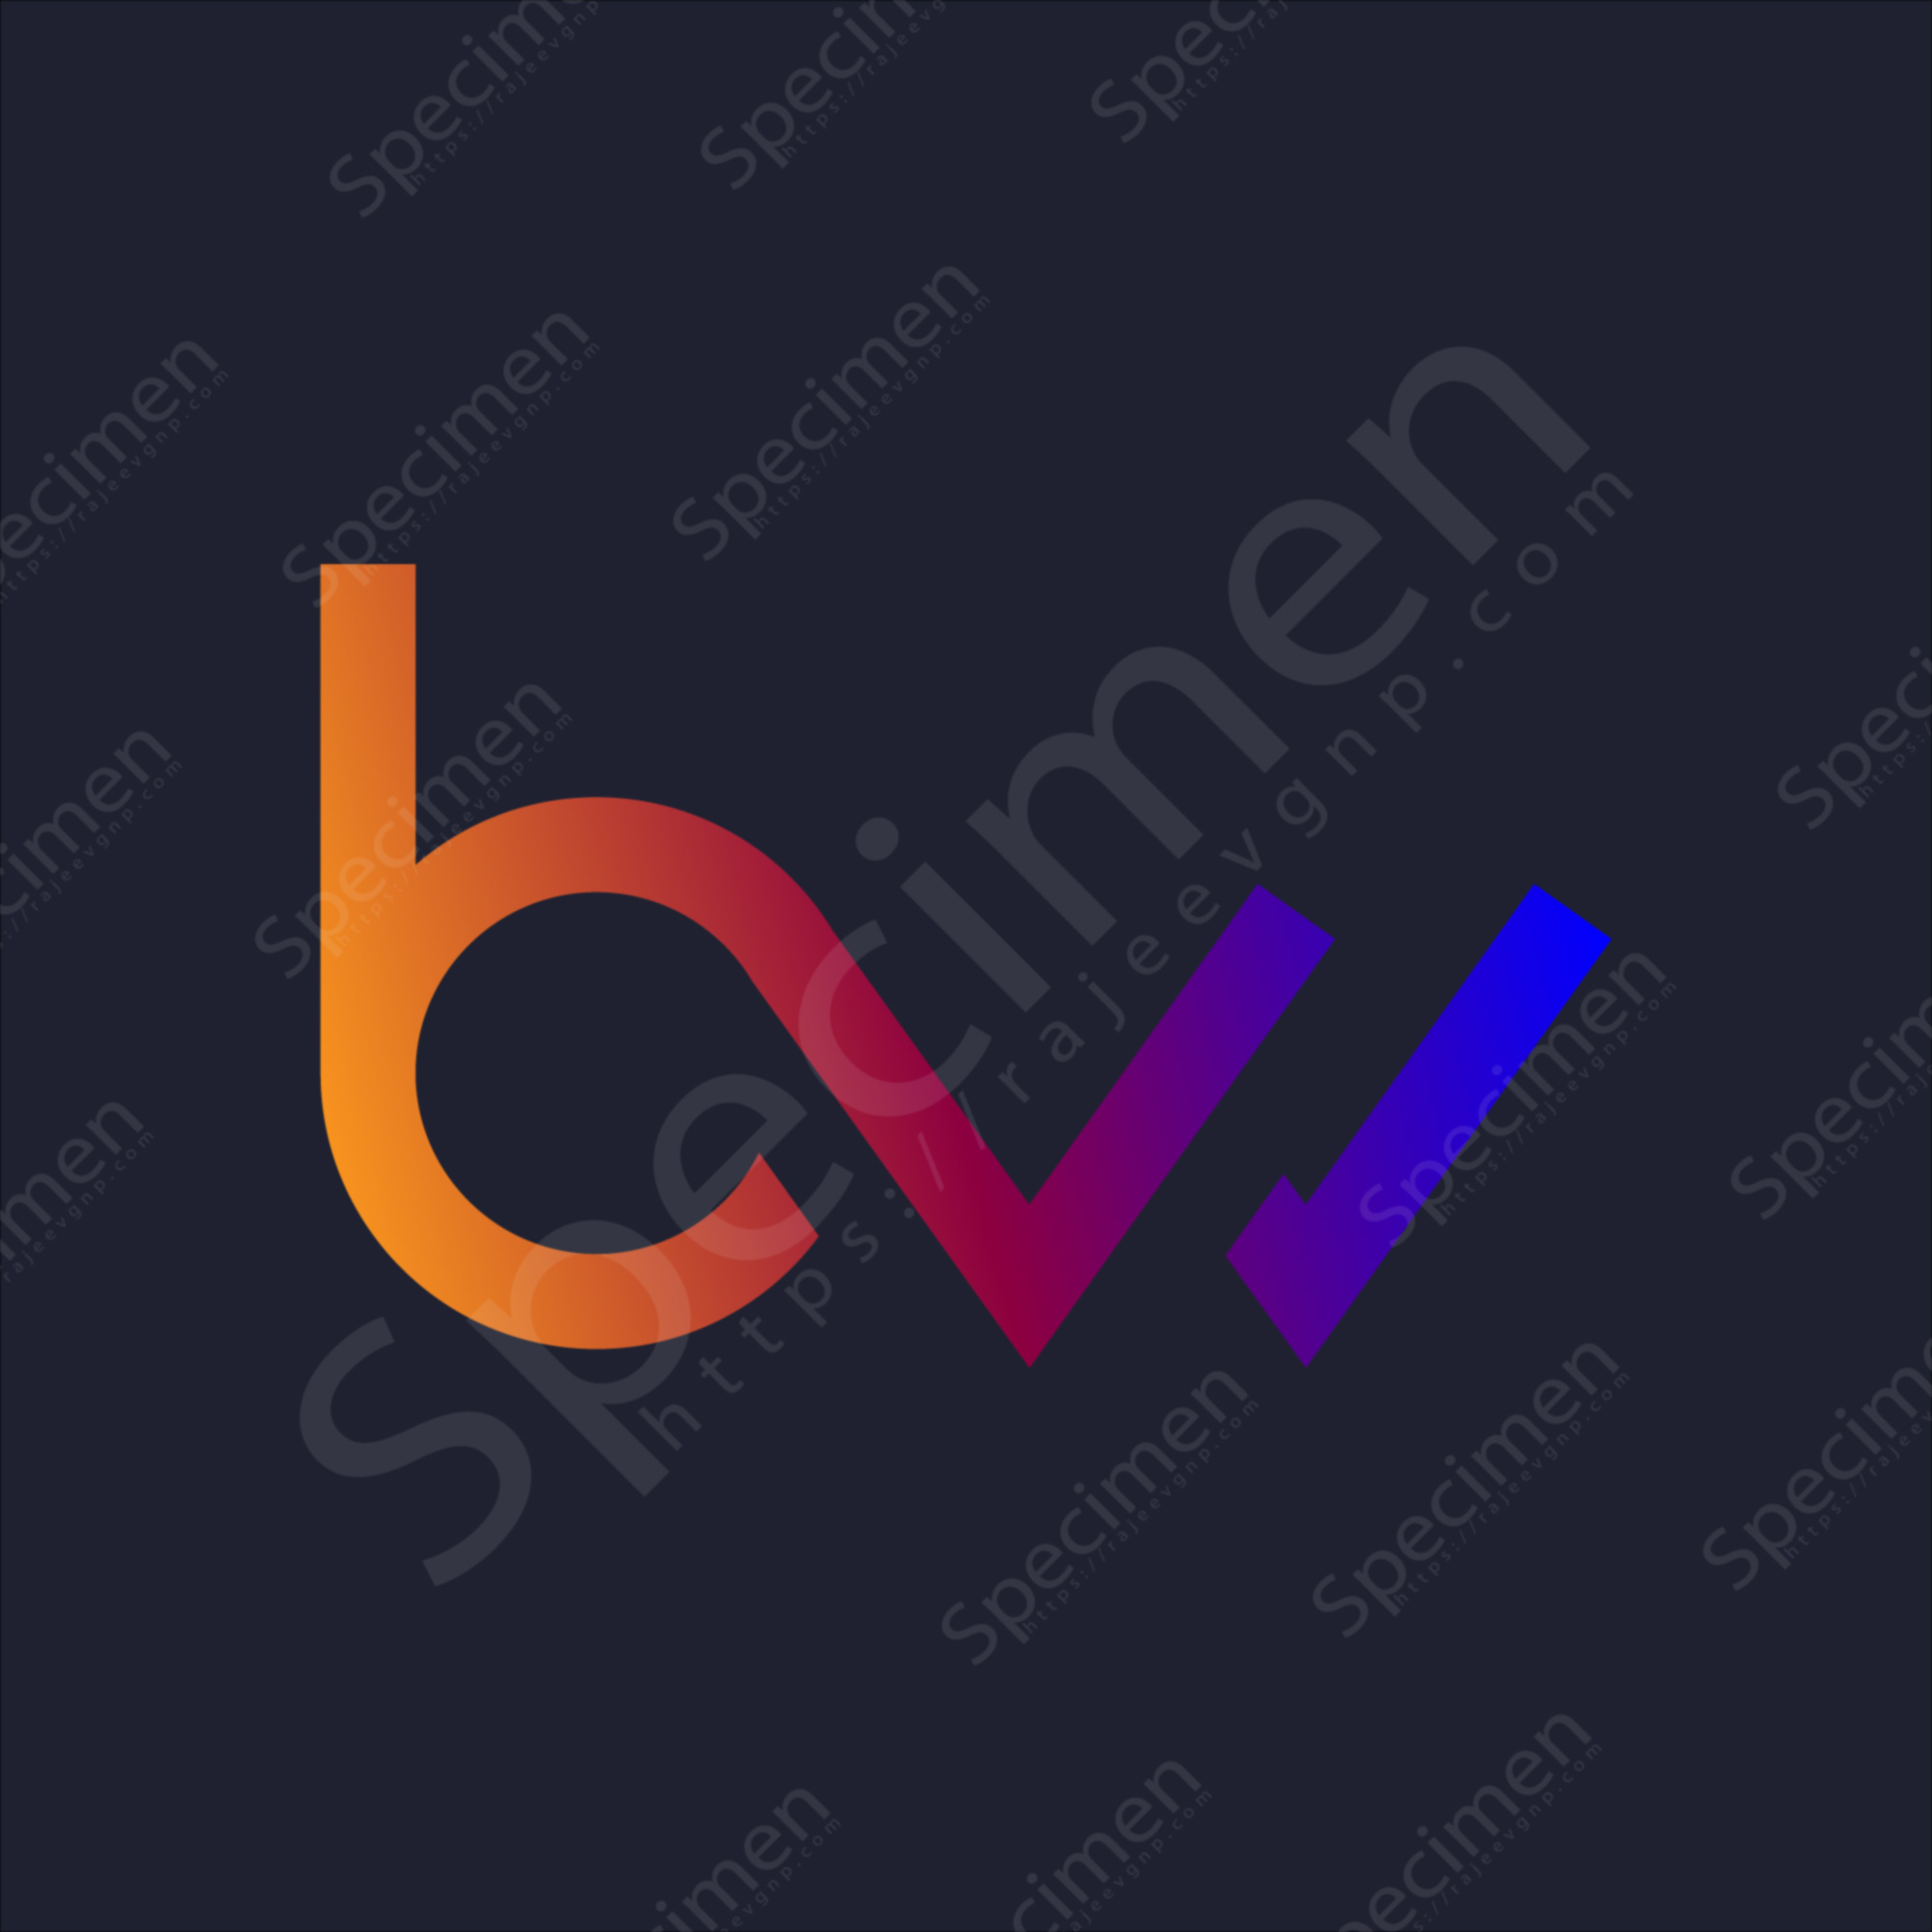 6,098 B W Logo Images, Stock Photos, 3D objects, & Vectors | Shutterstock